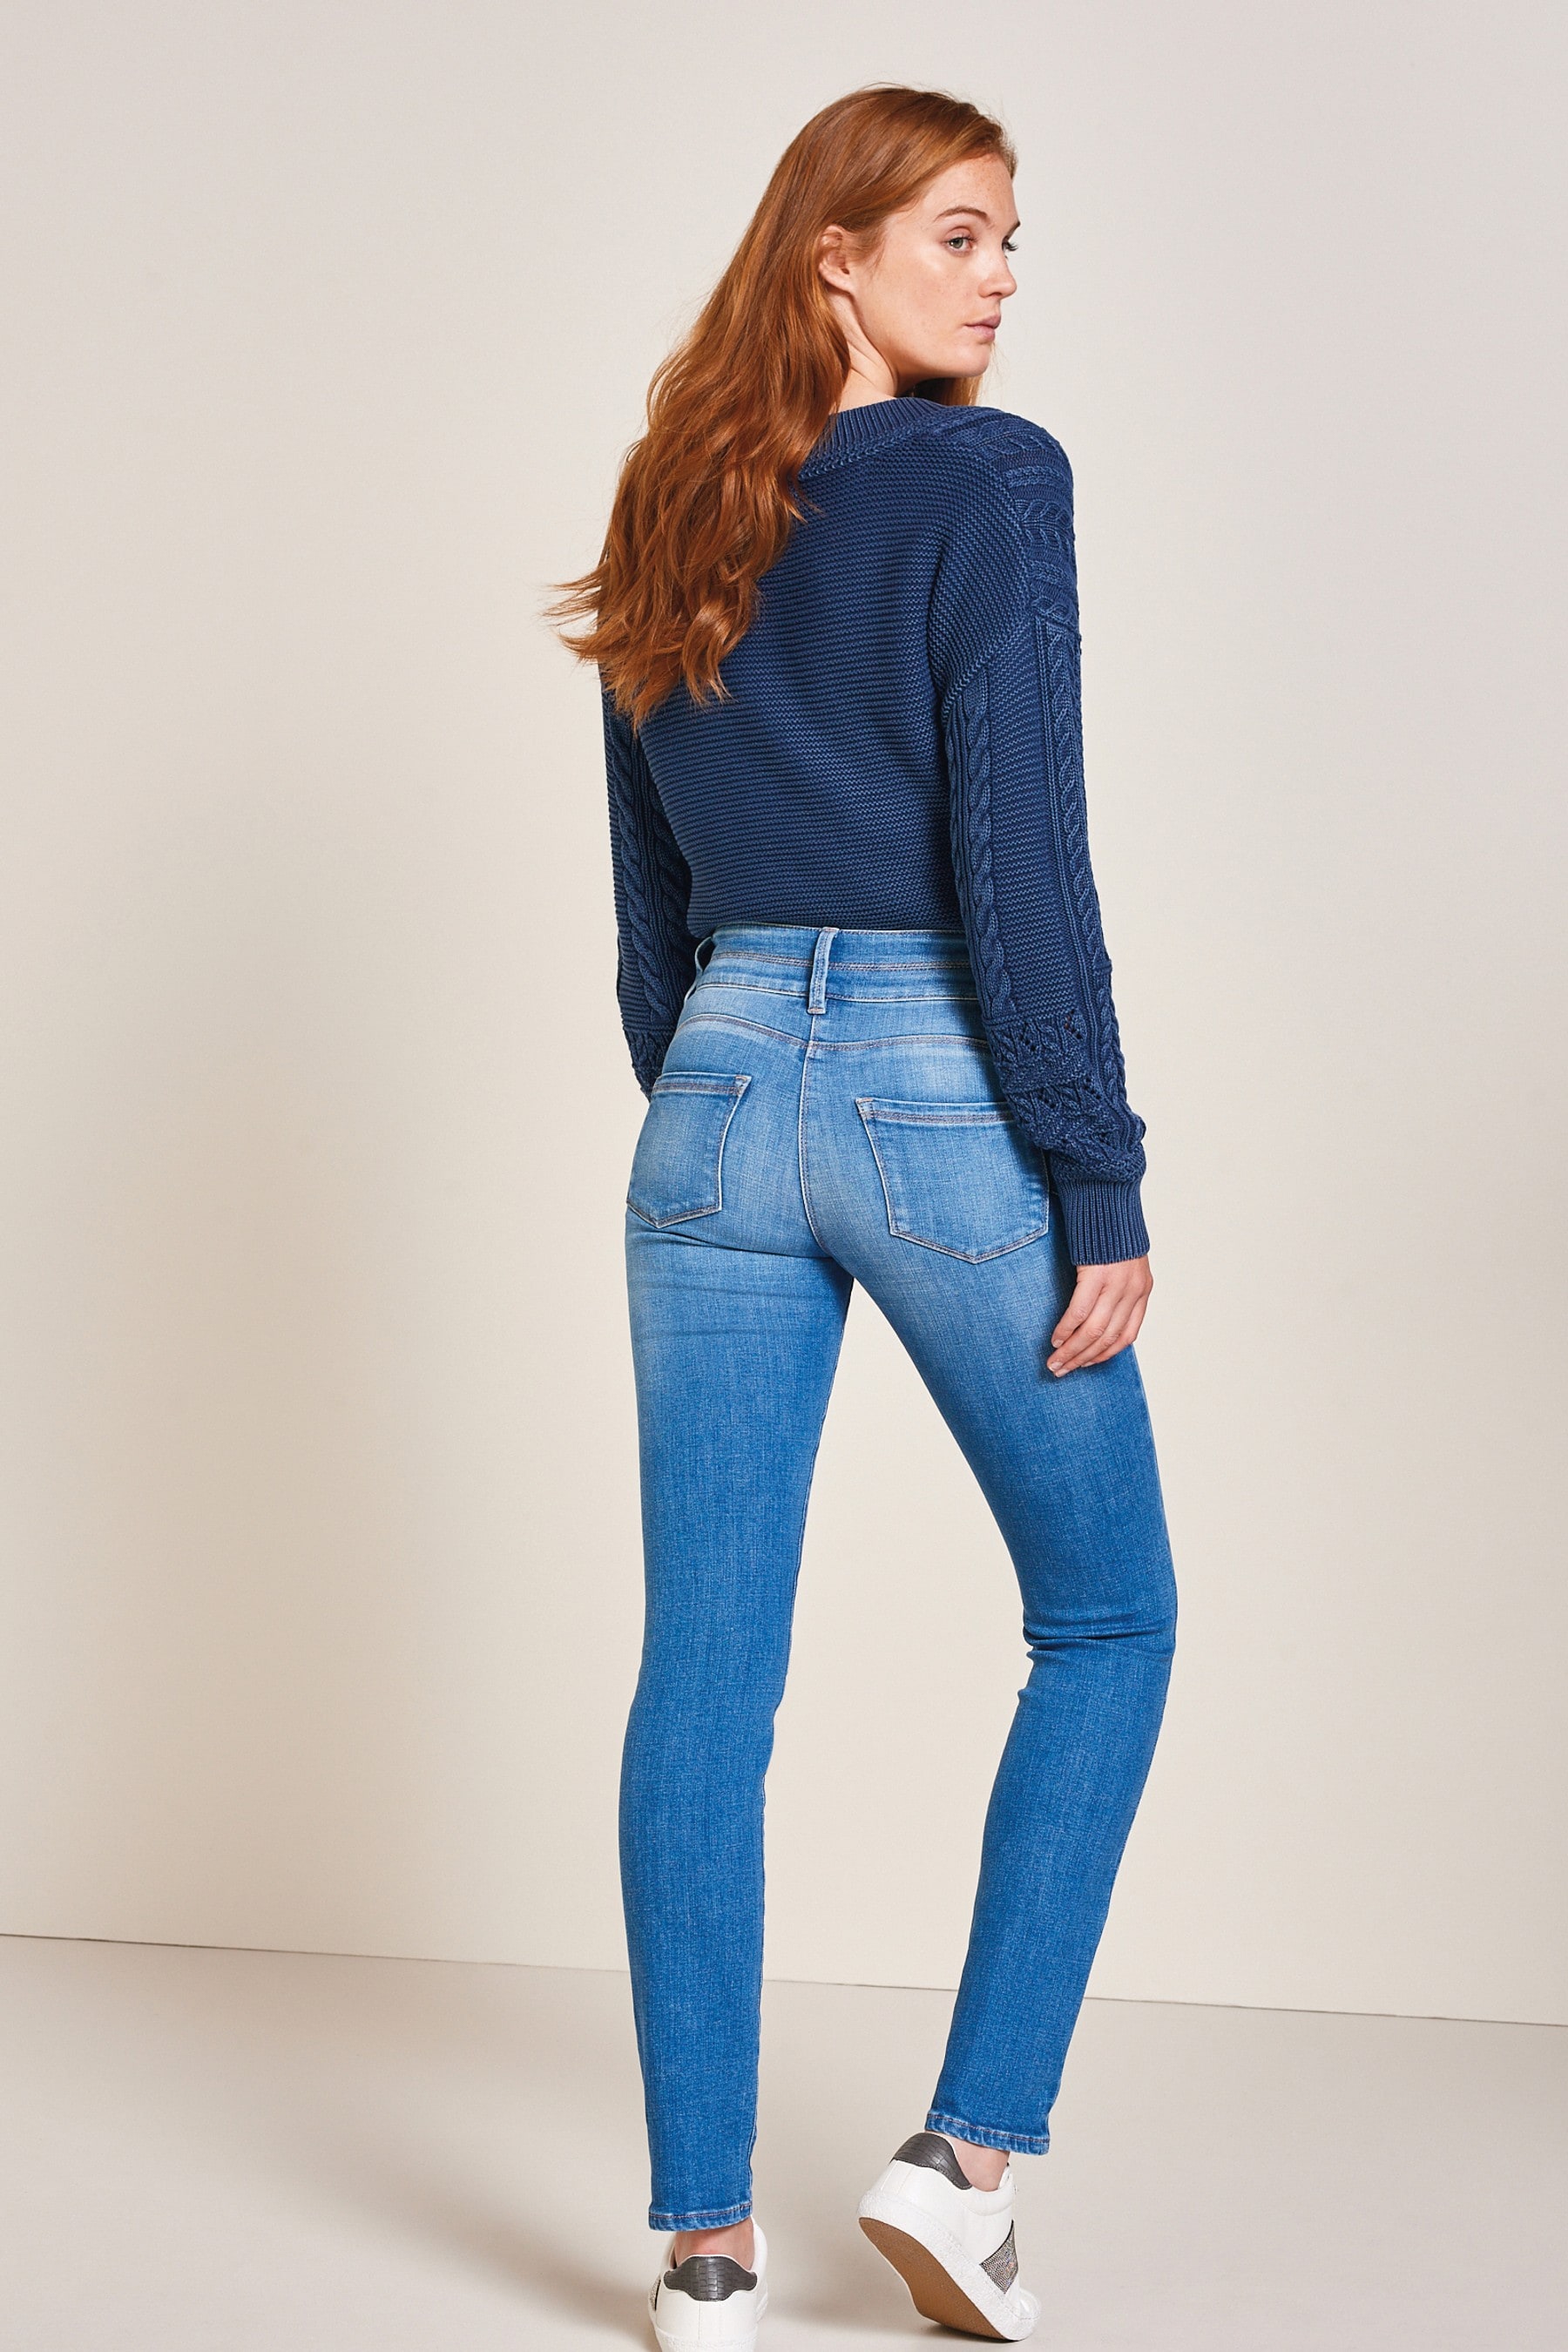 Buy Slim Lift And Shape Jeans from Next Ireland